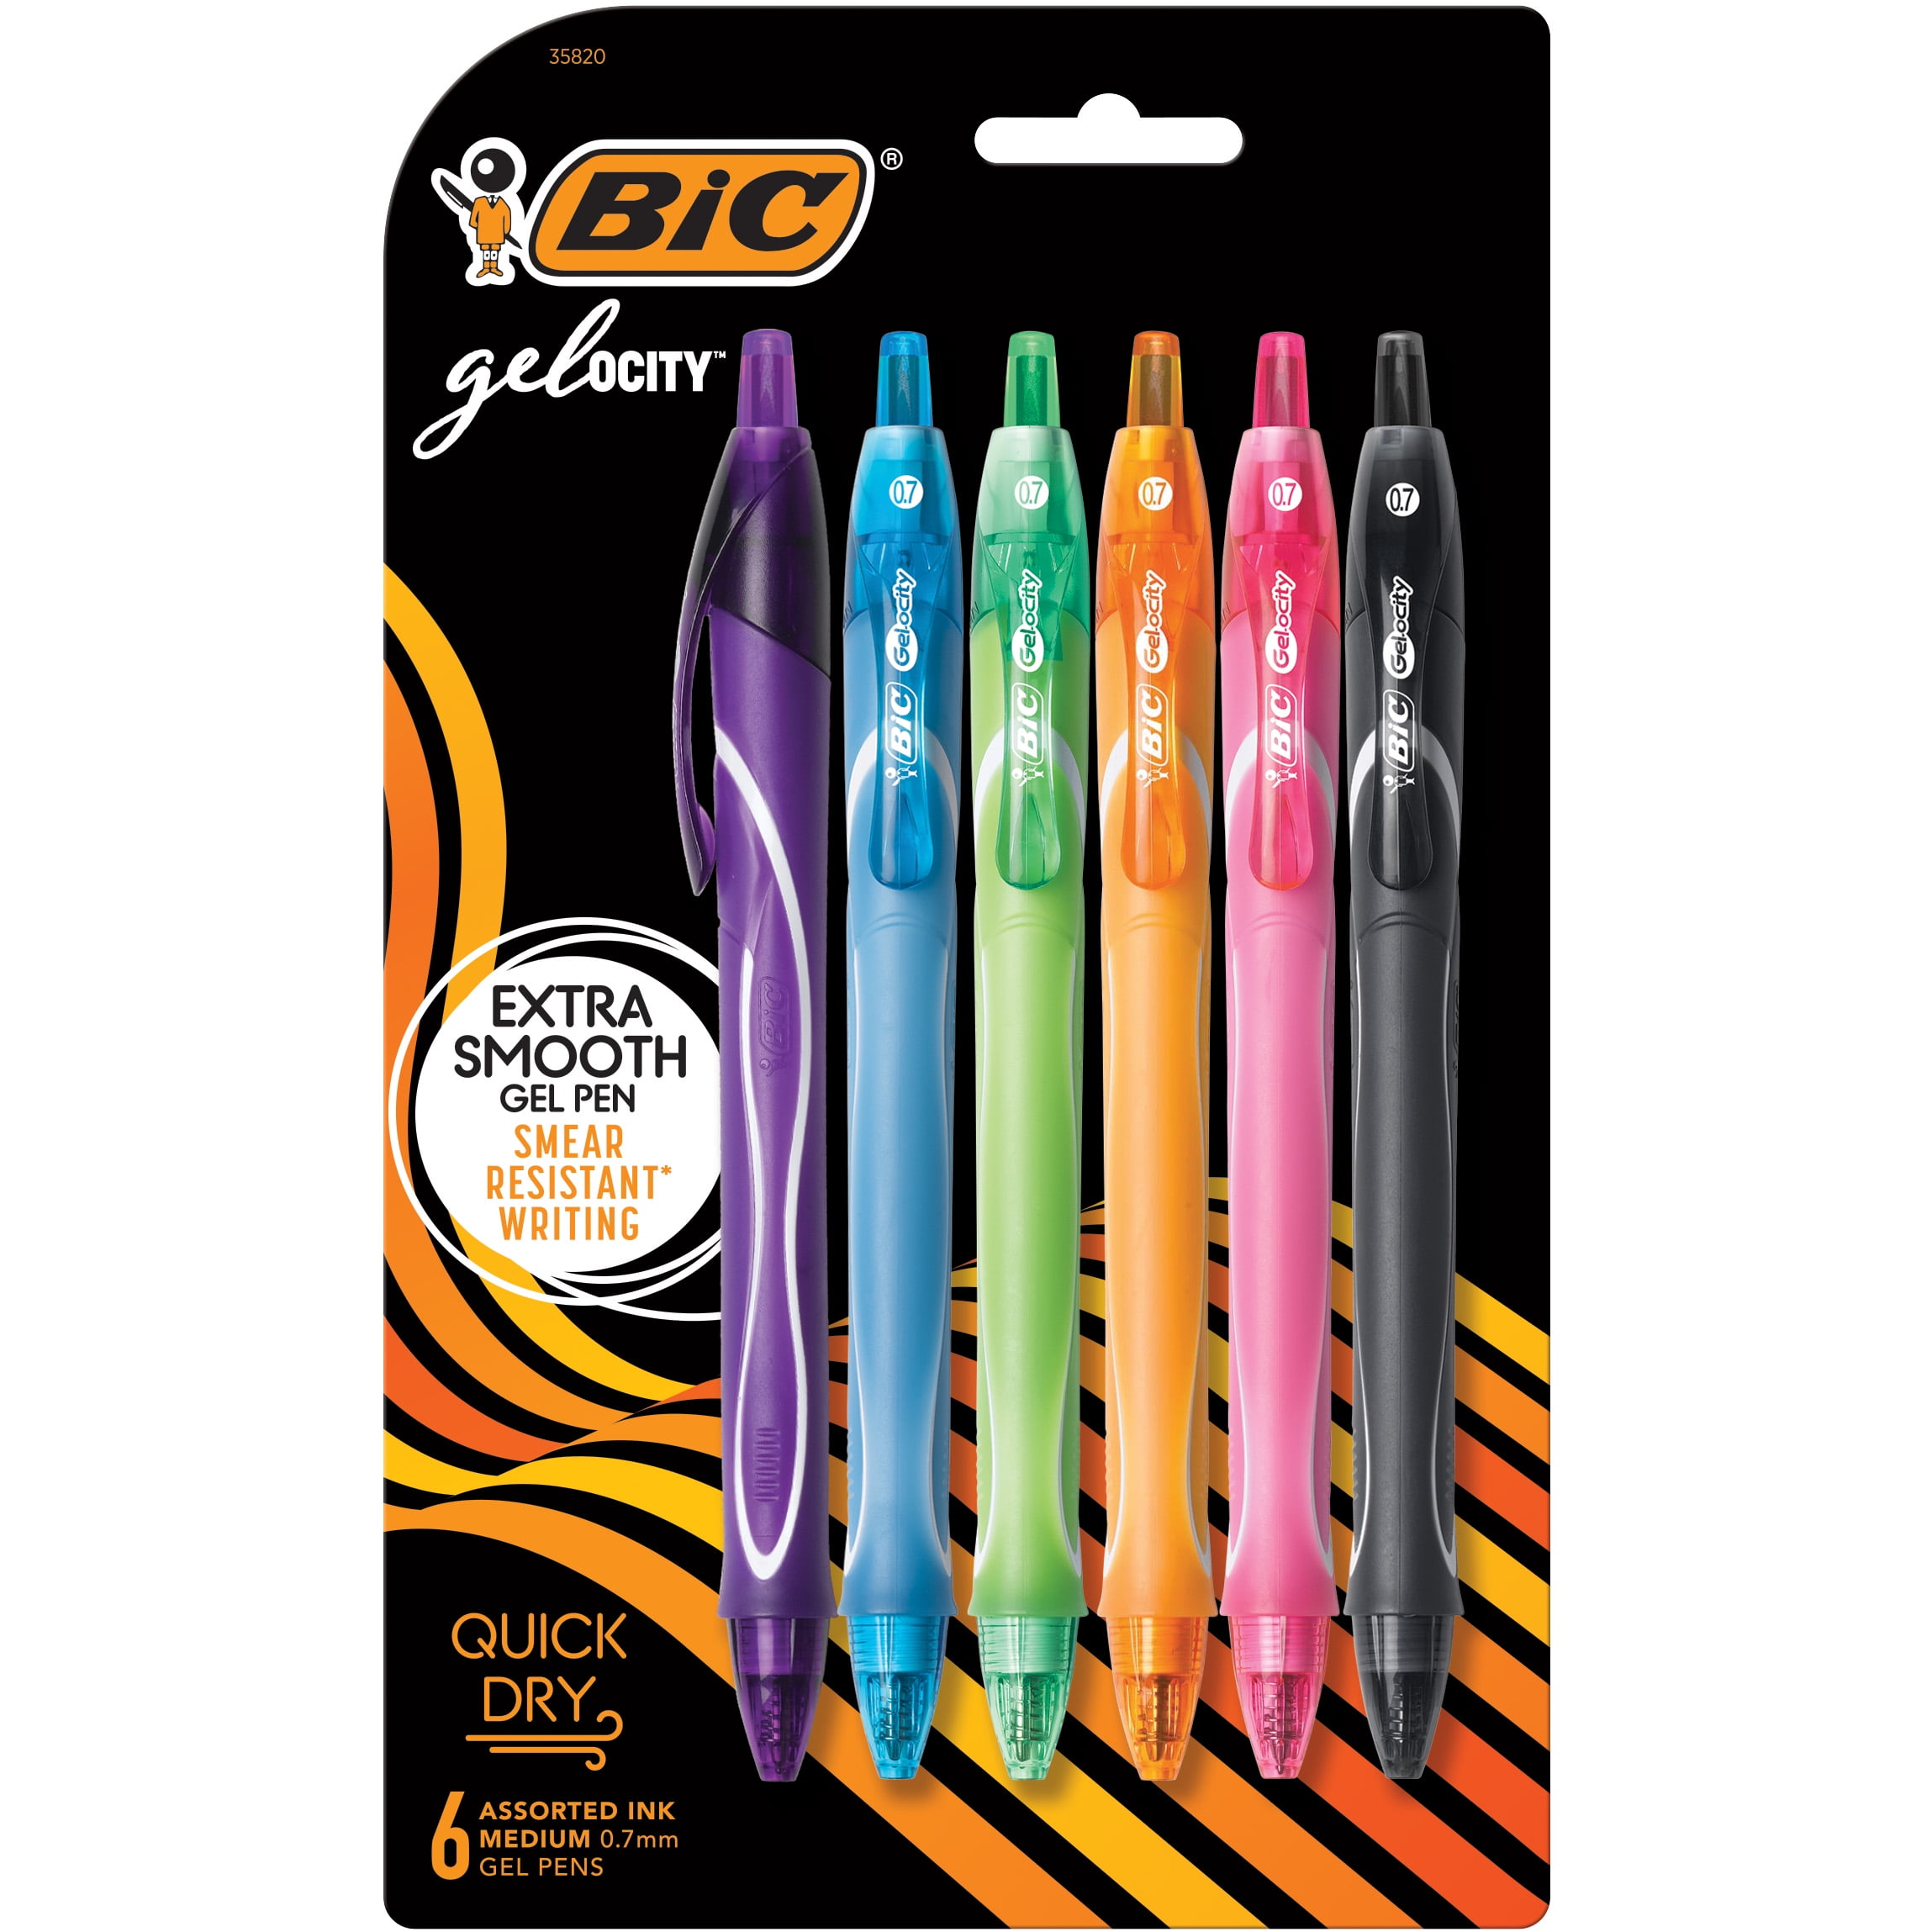 BIC Gel-ocity Quick Dry Fashion Gel Pens, Assorted Colors, 6 Count